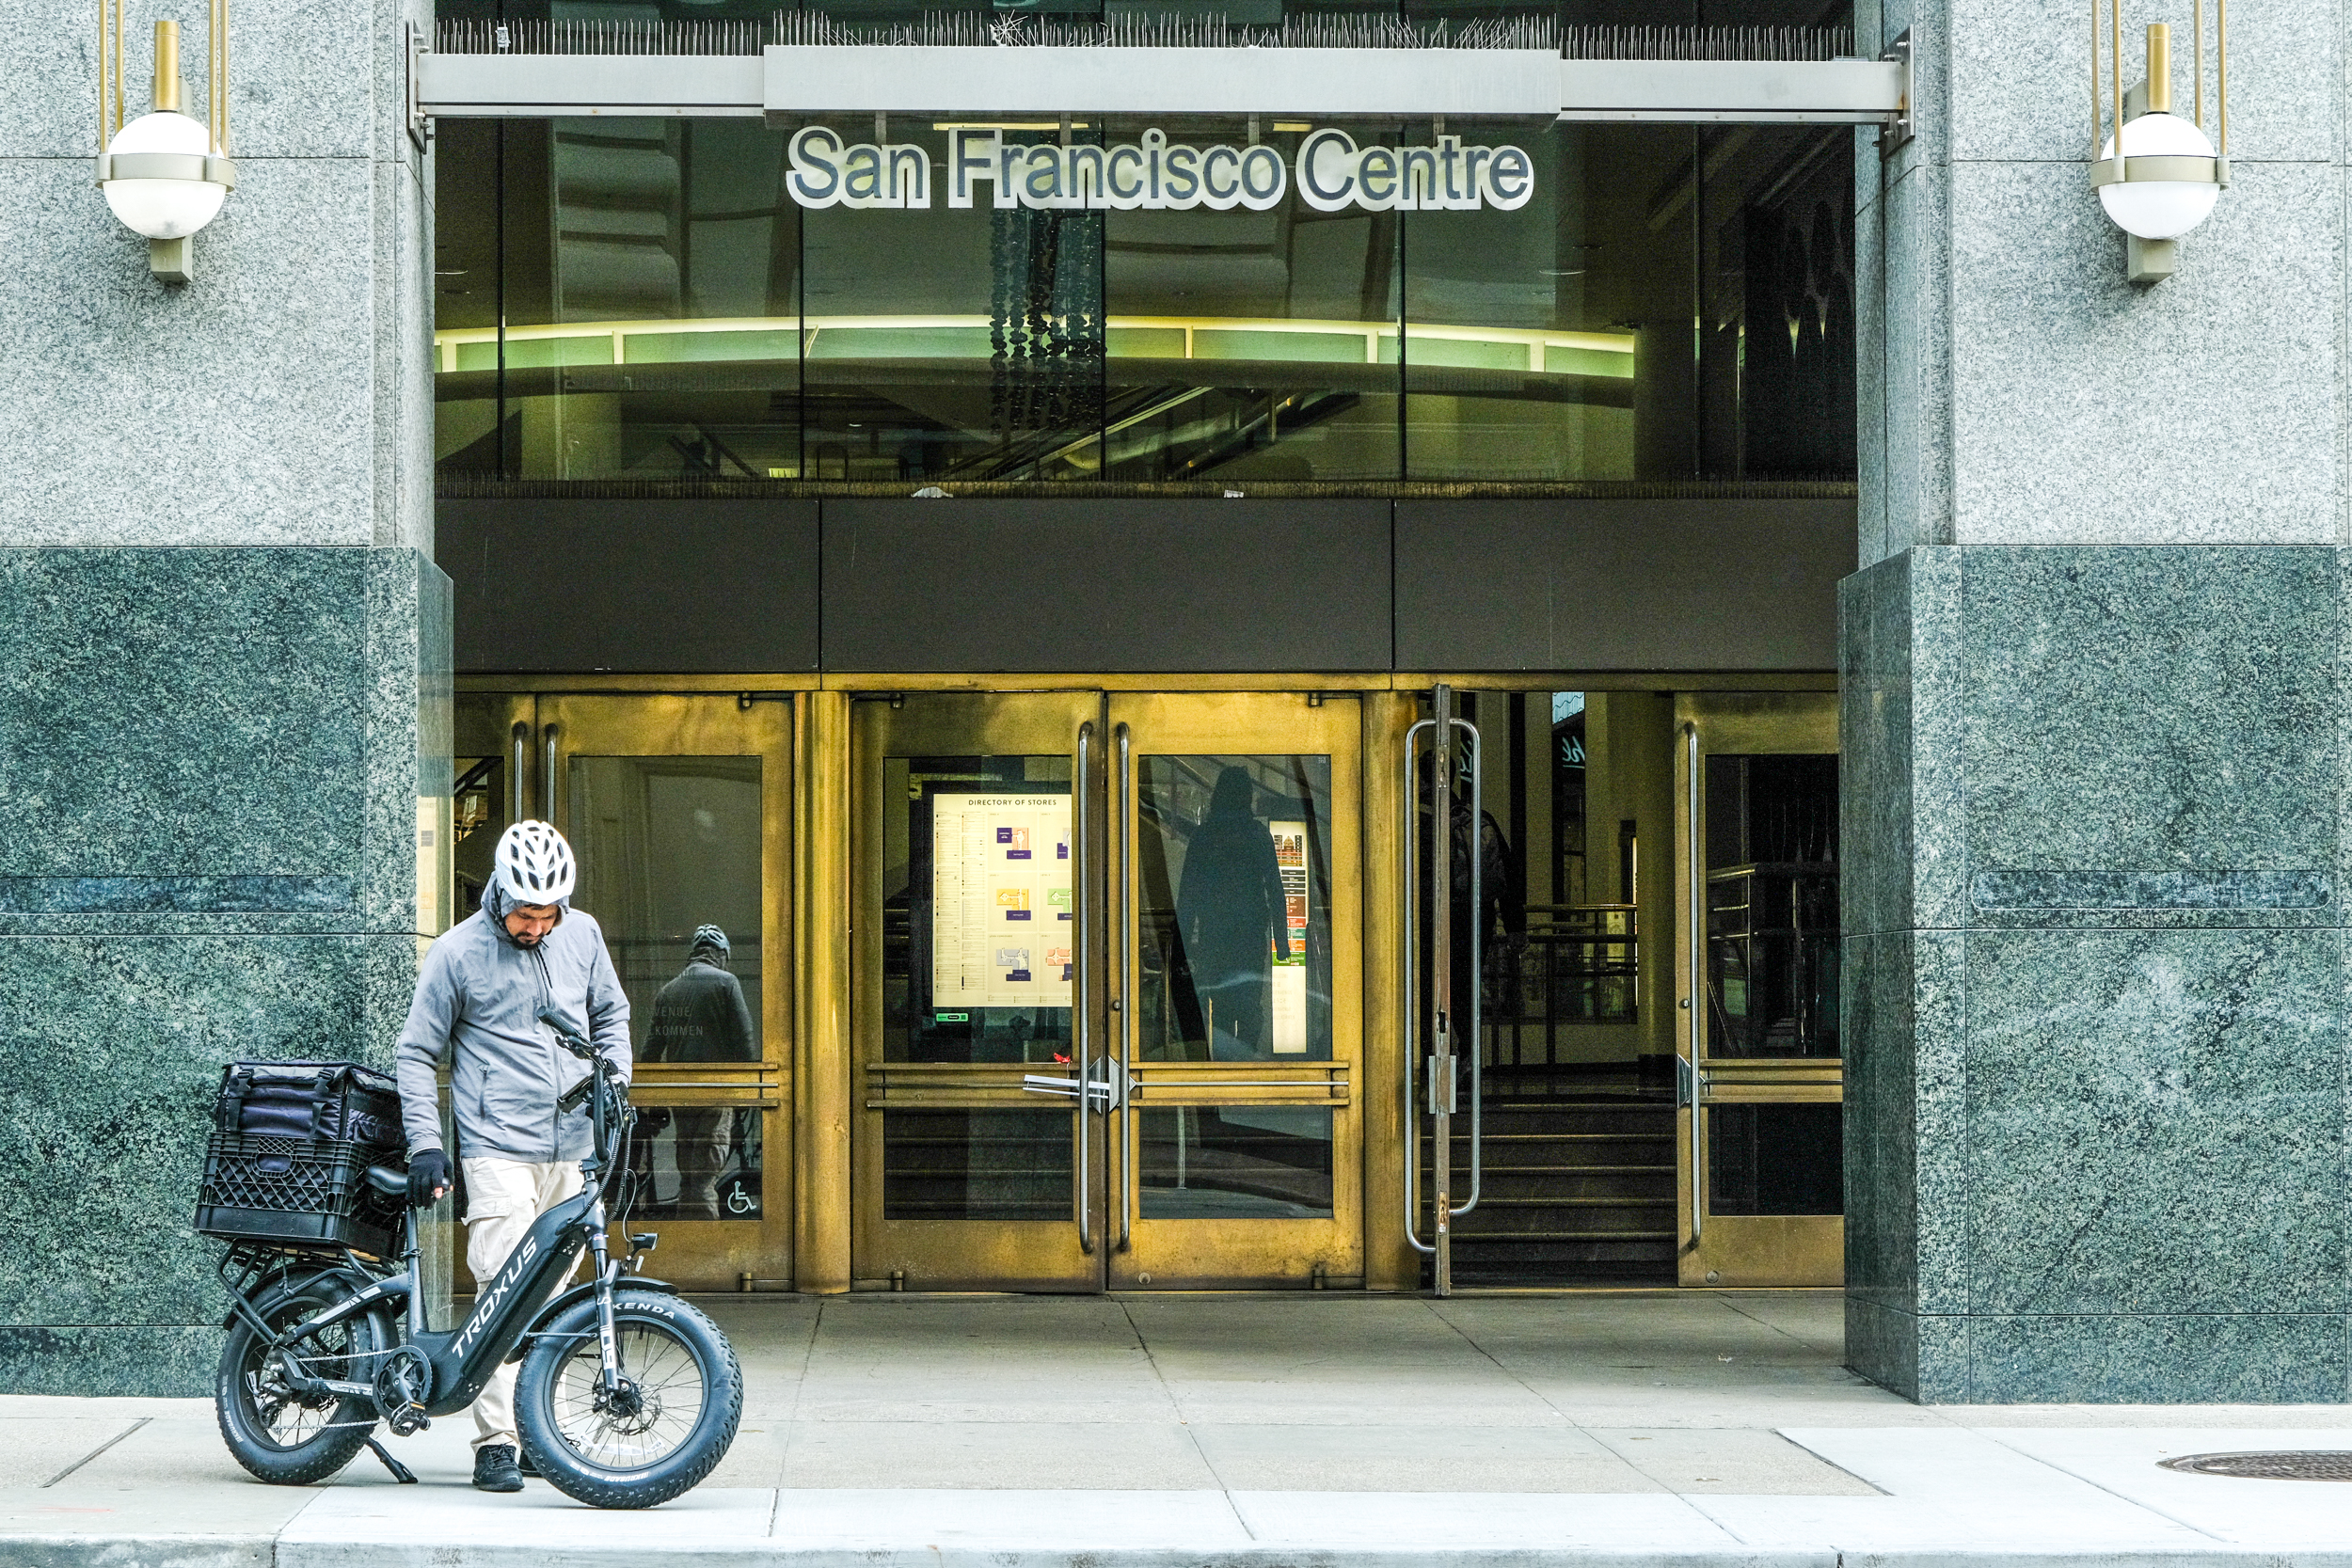 A person by a bike stands in front of the San Francisco Centre entrance with bold signage.